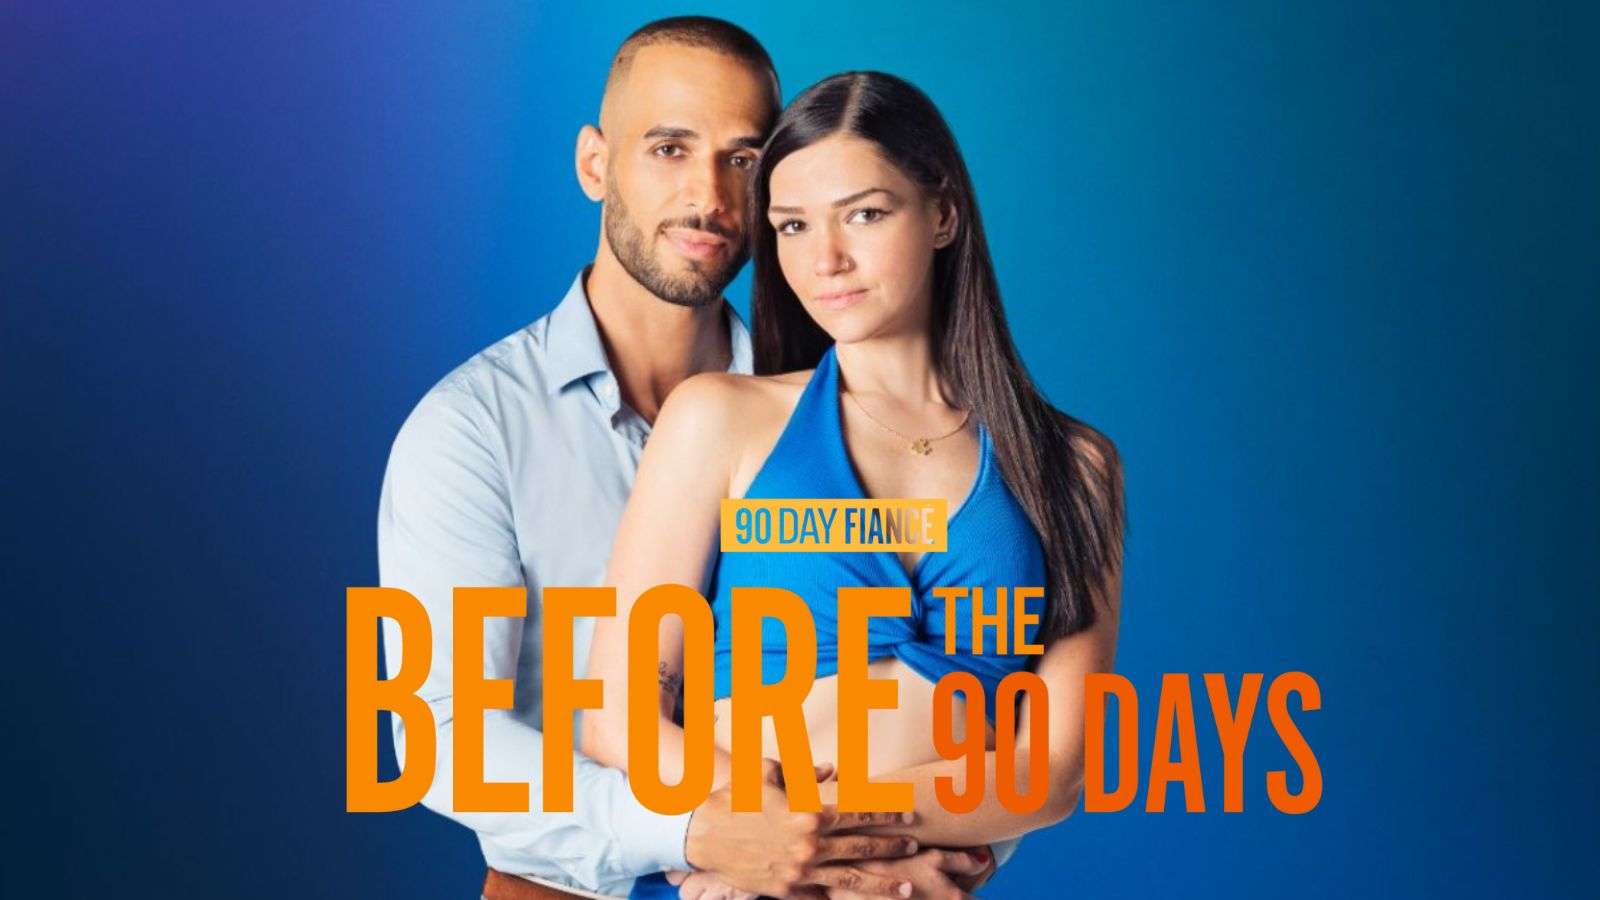 Amanda and Razvan from 90 Day Fiancé: Before the 90 Days